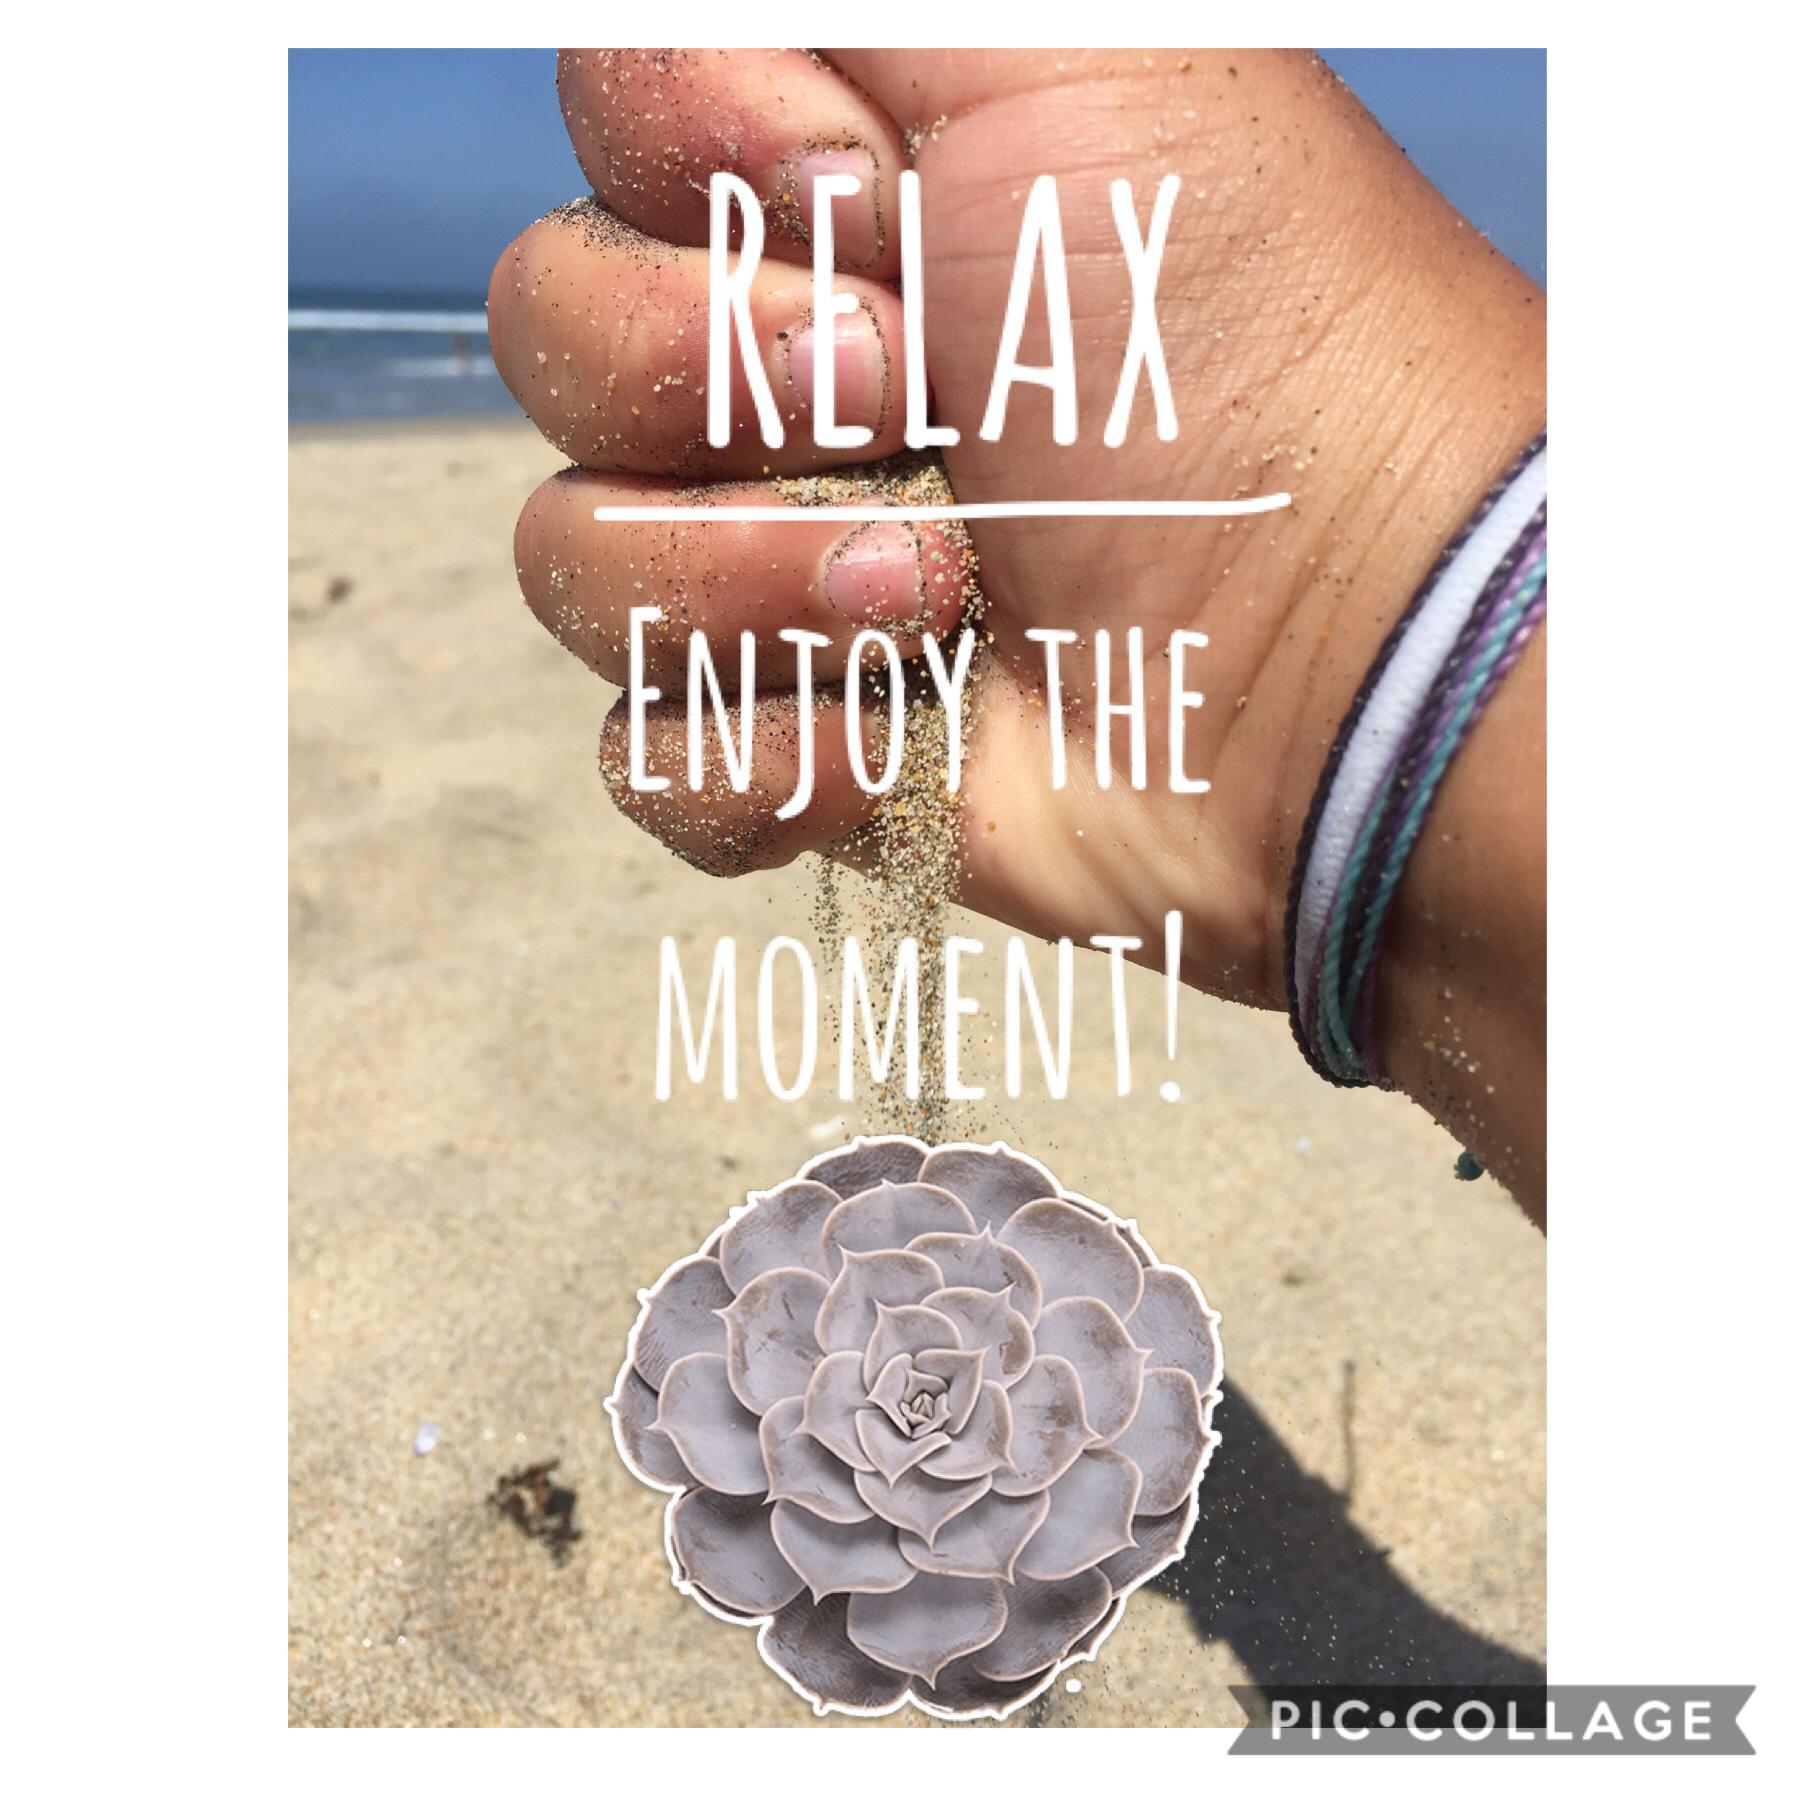 Relax. Enjoy the moment!